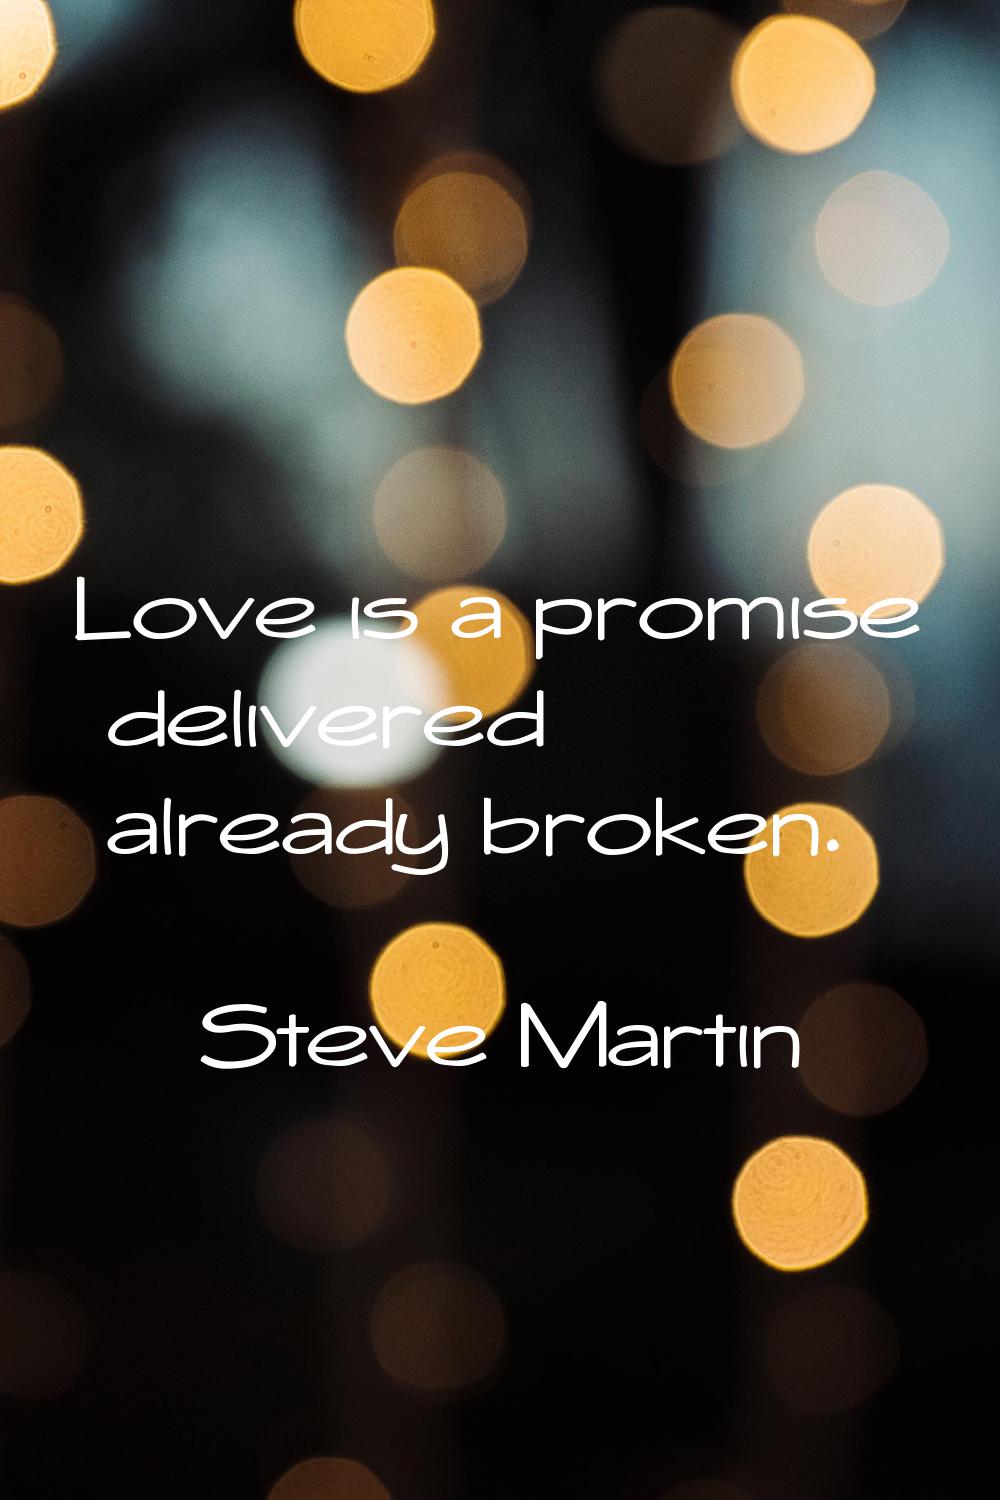 Love is a promise delivered already broken.